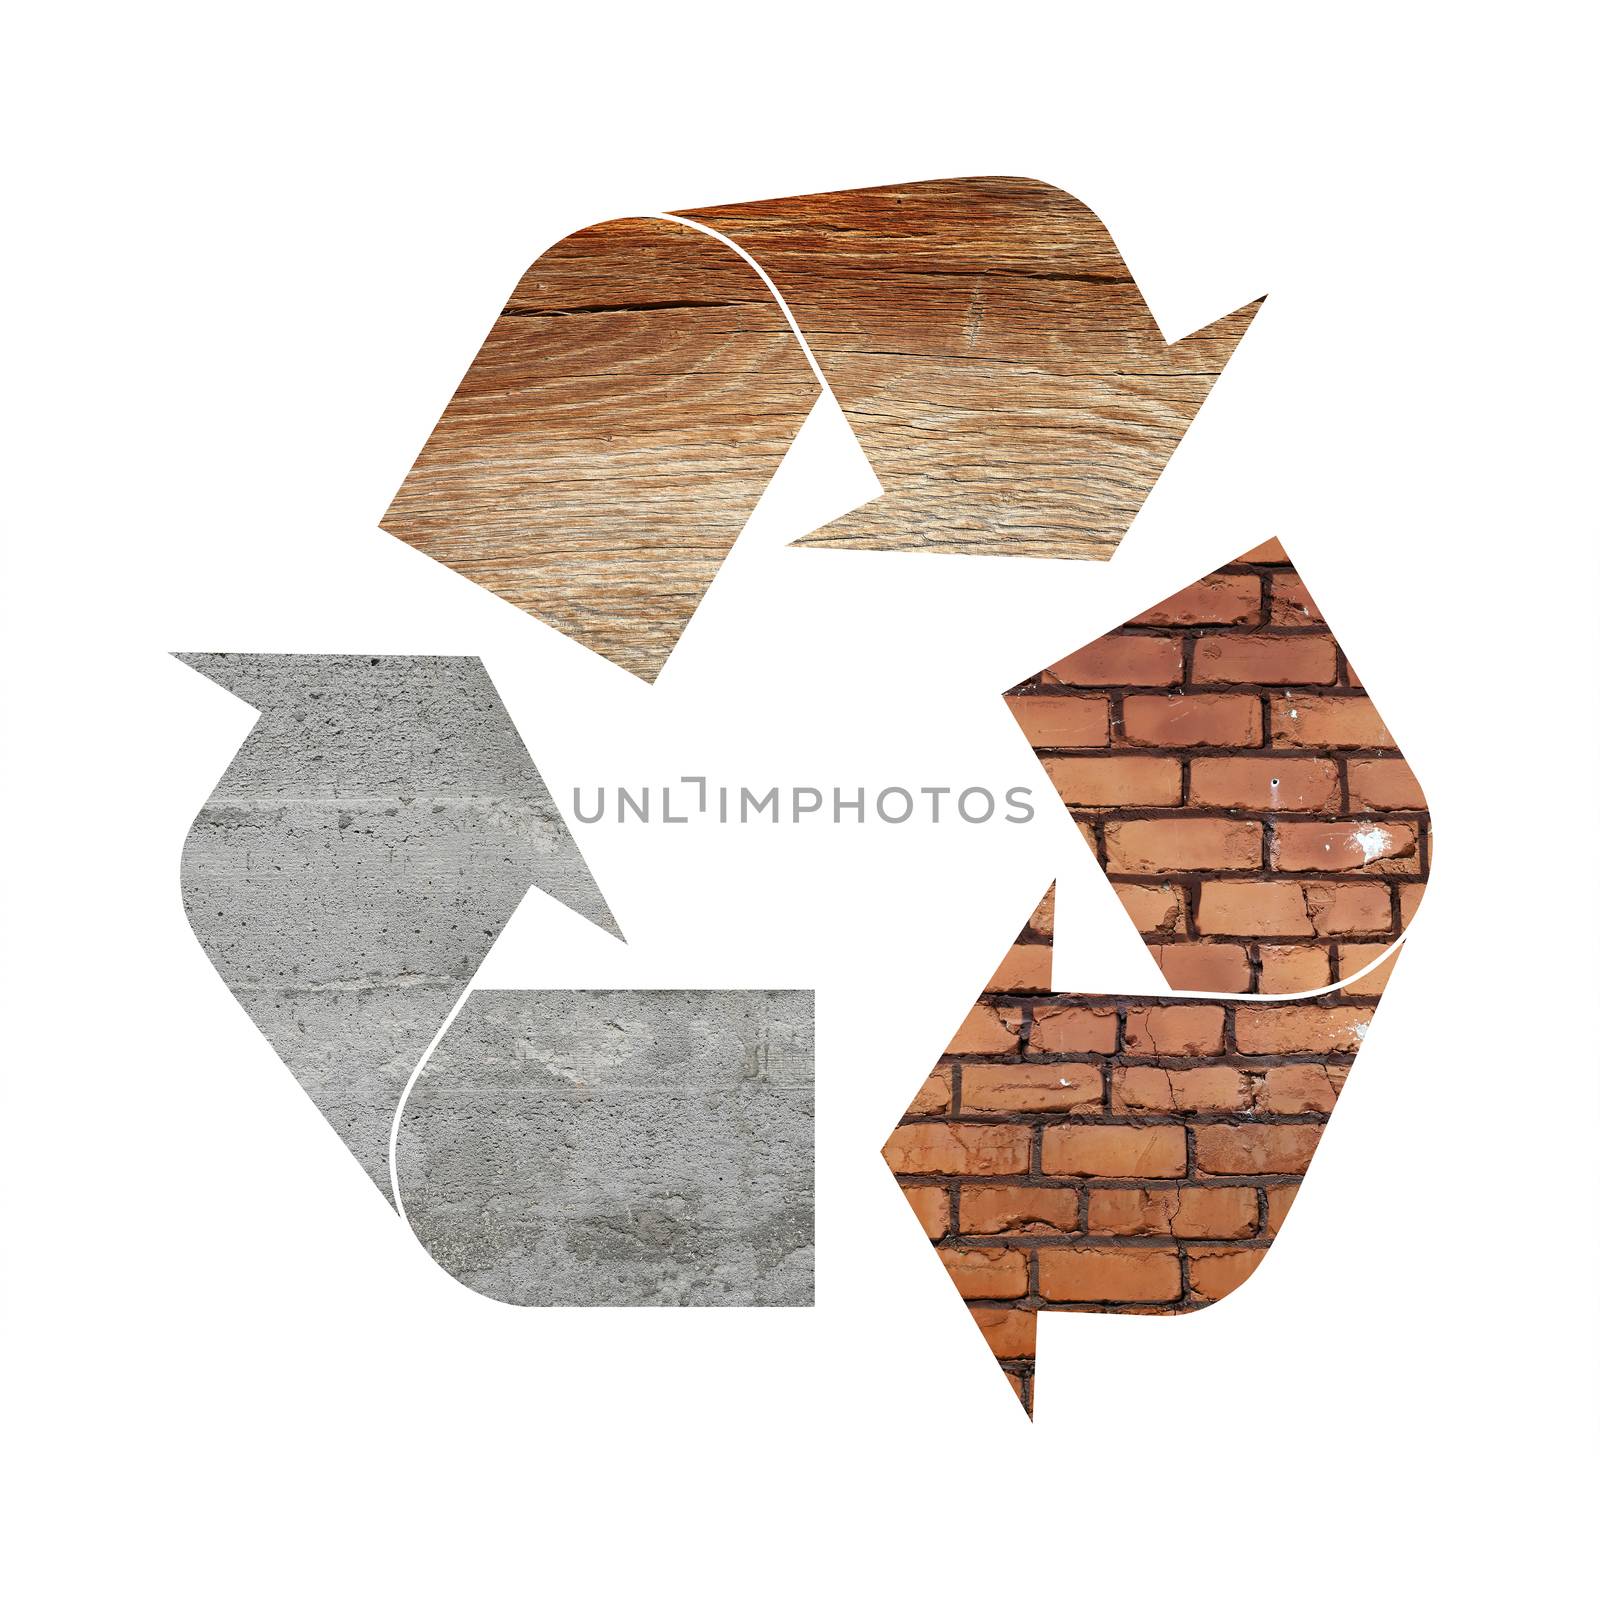 Illustration recycling symbol of different industrial construction materials, concrete, wood and bricks, isolated on white background